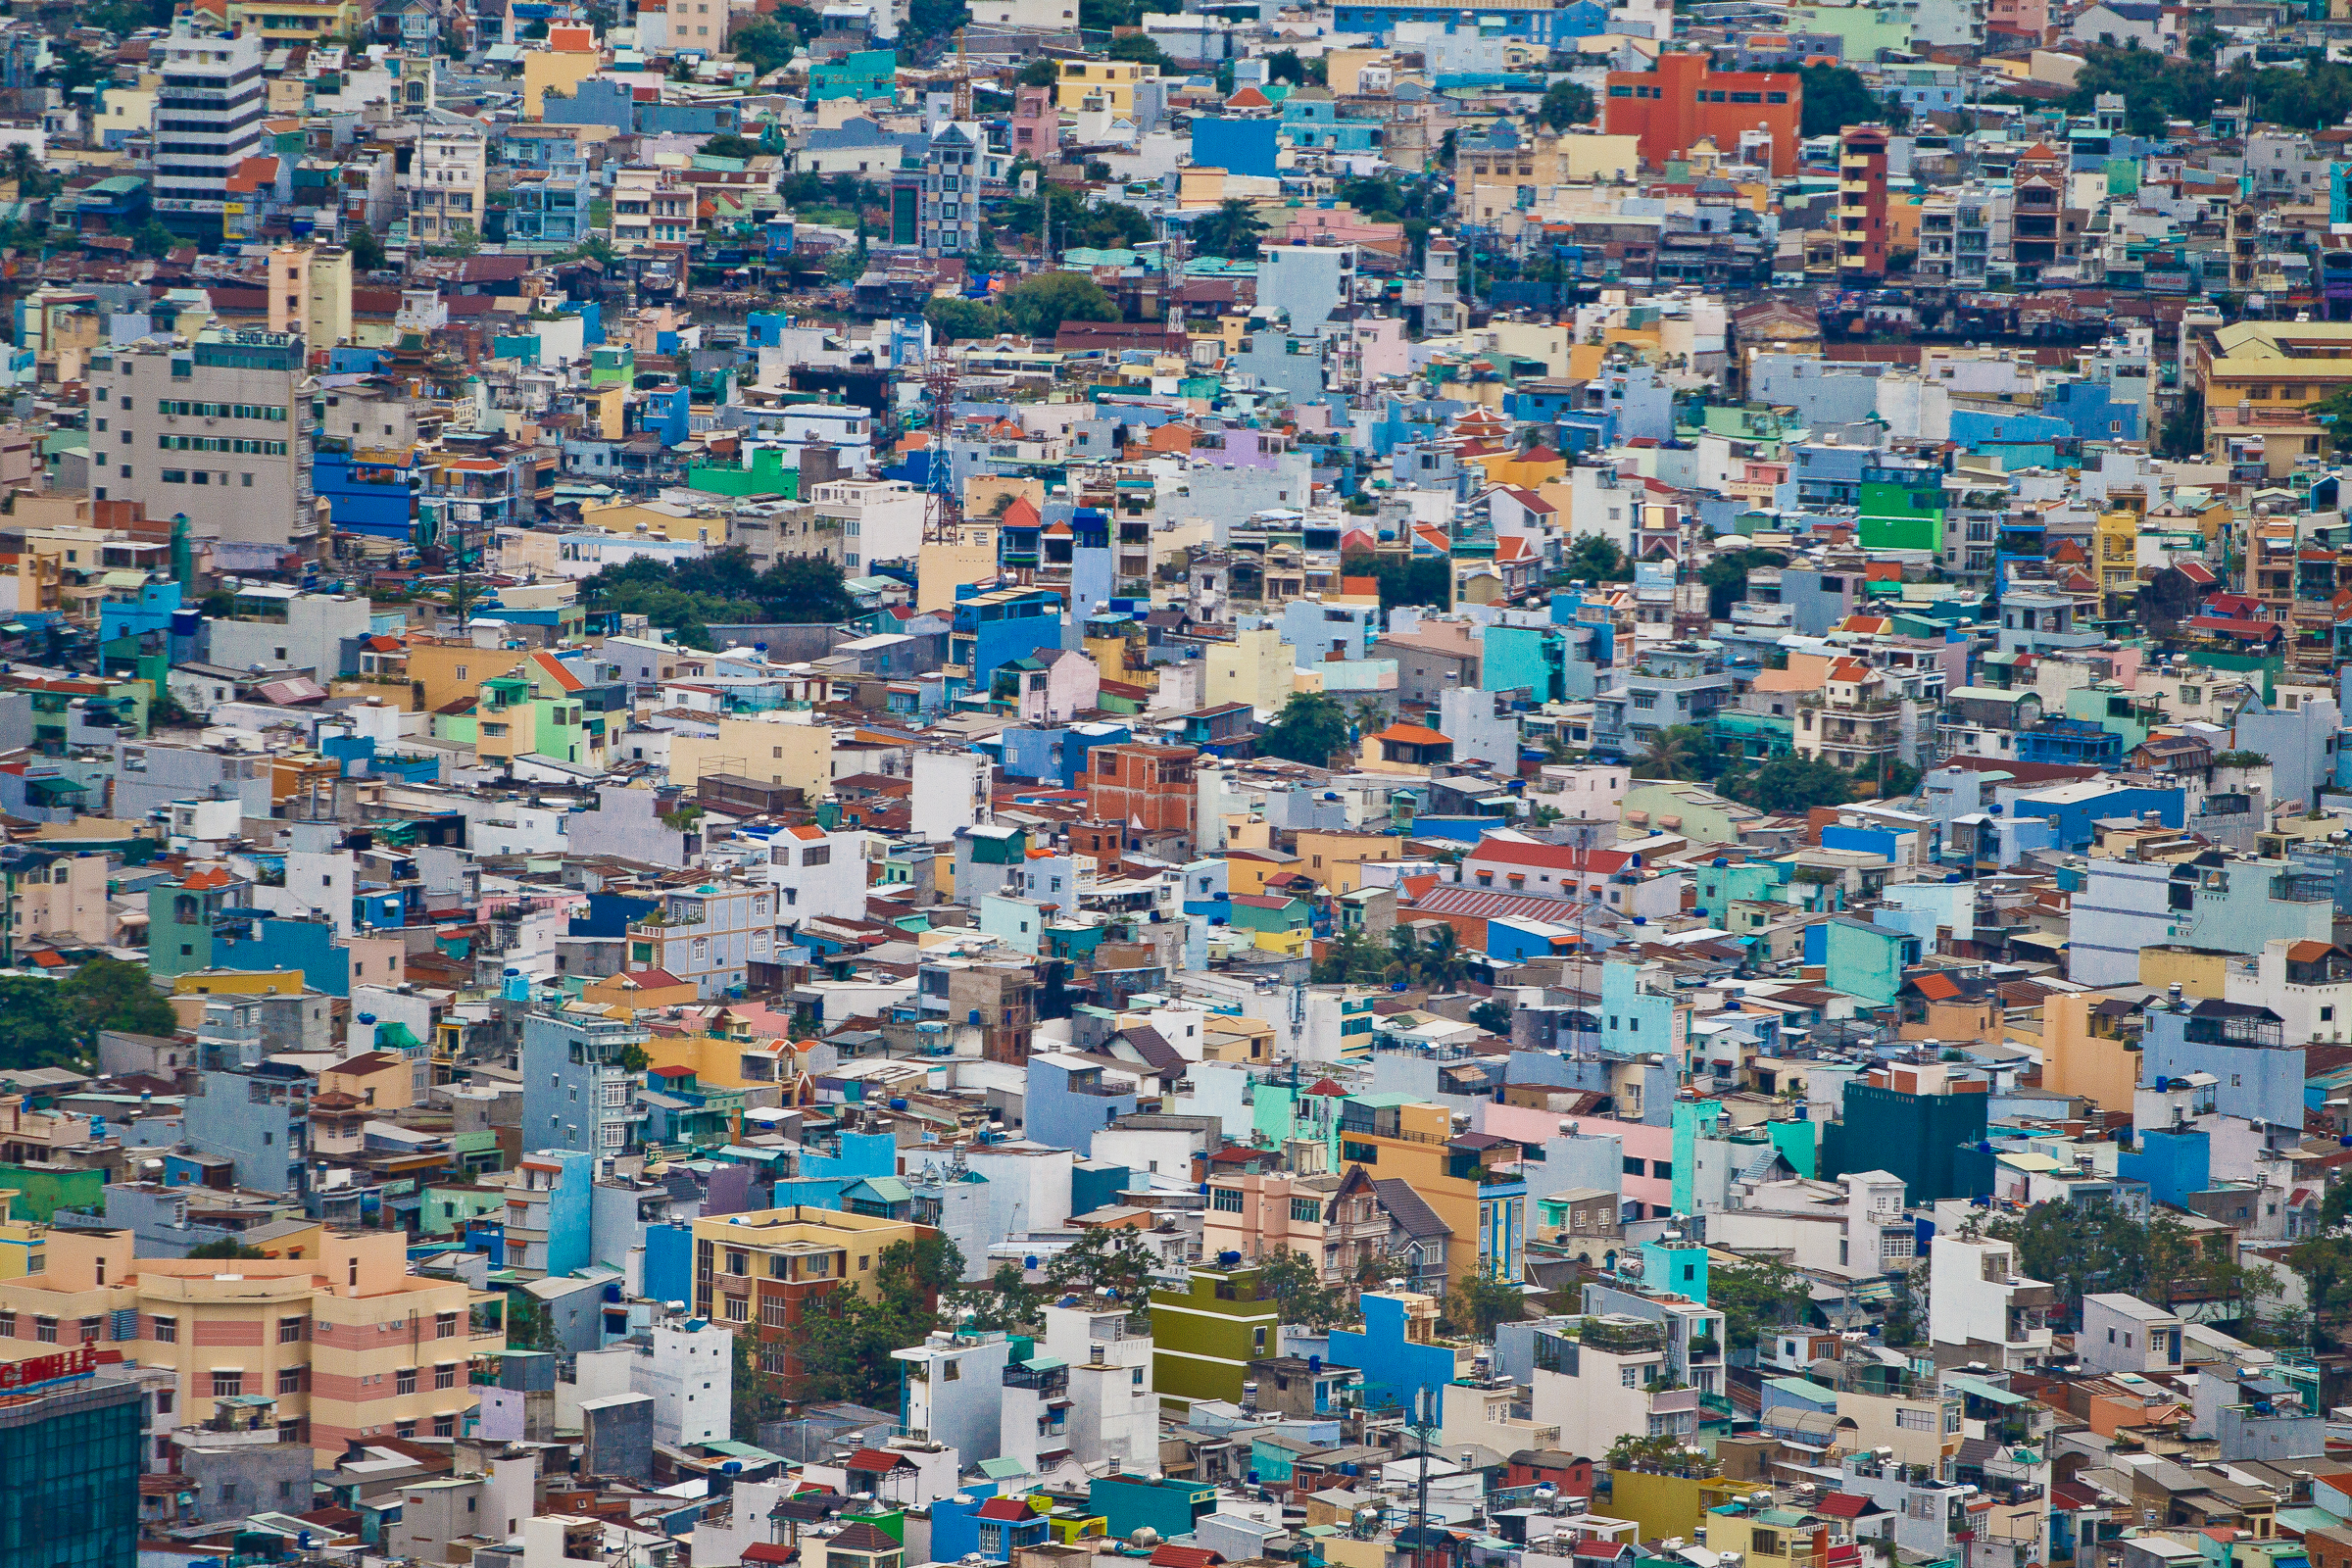 Colourful buildings are packed tightly together in Ho Chi Minh City, Vietnam.